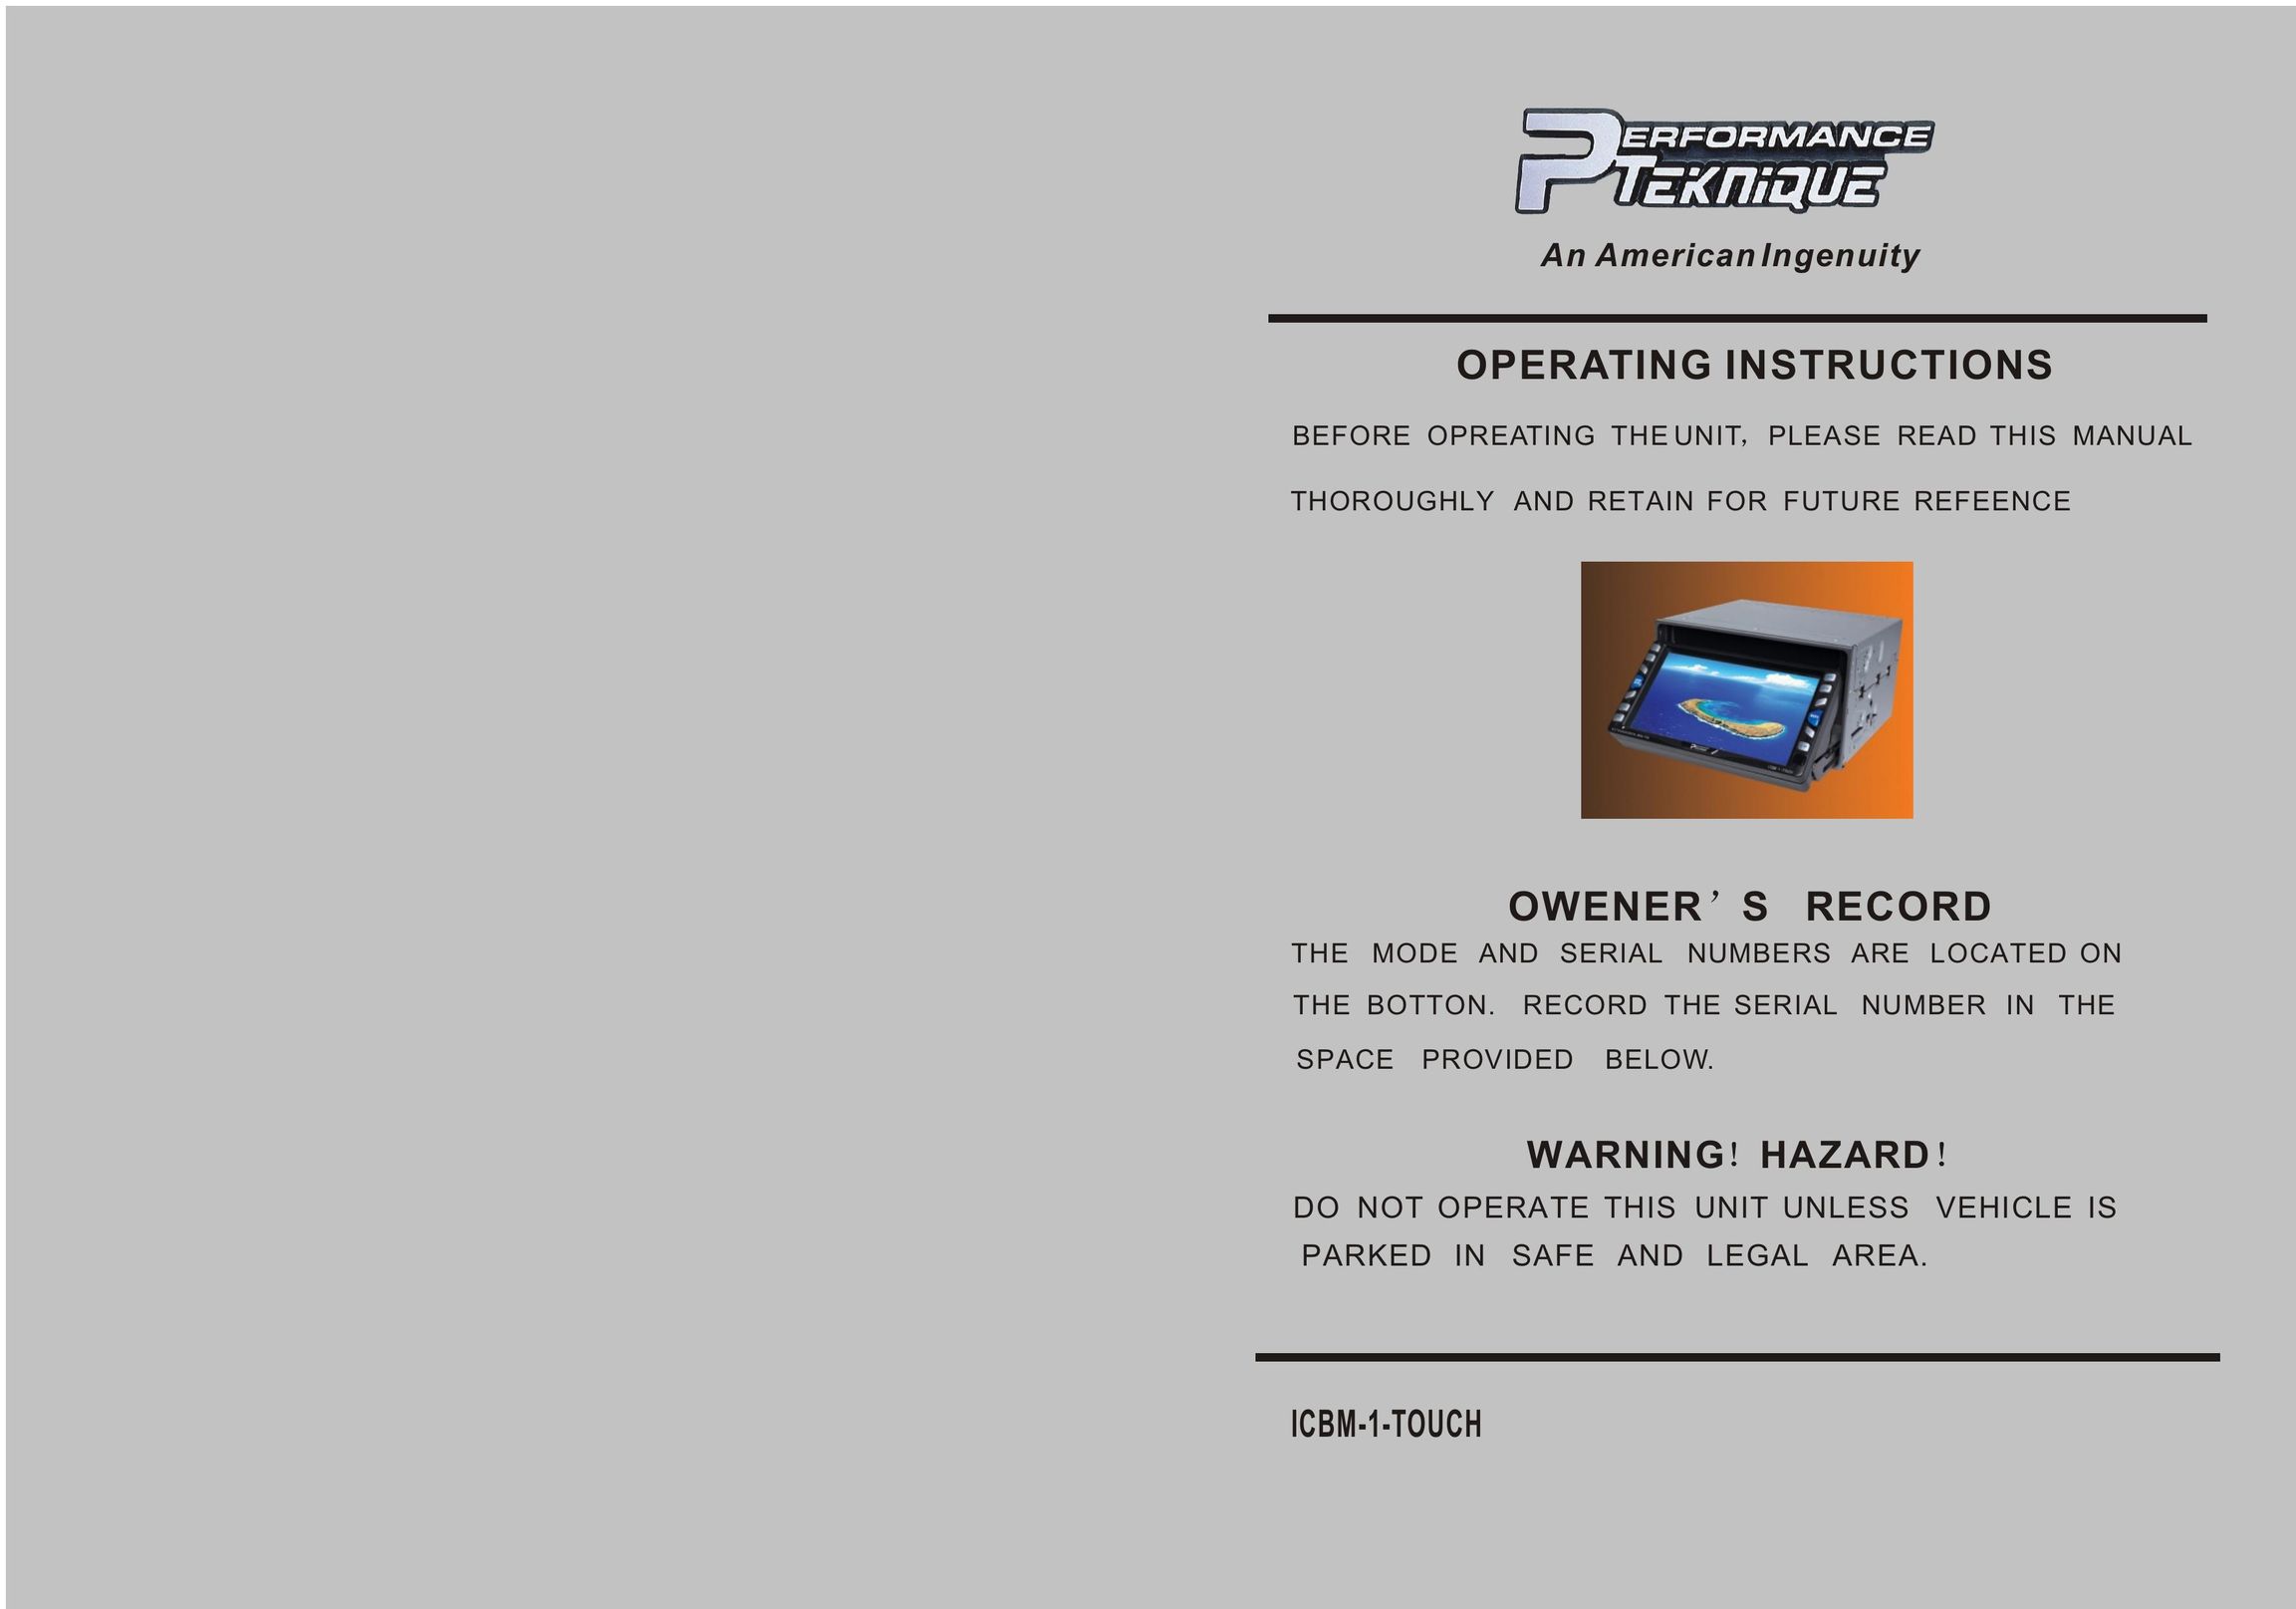 Performance Teknique ICBM-1-TOUCH Car Stereo System User Manual